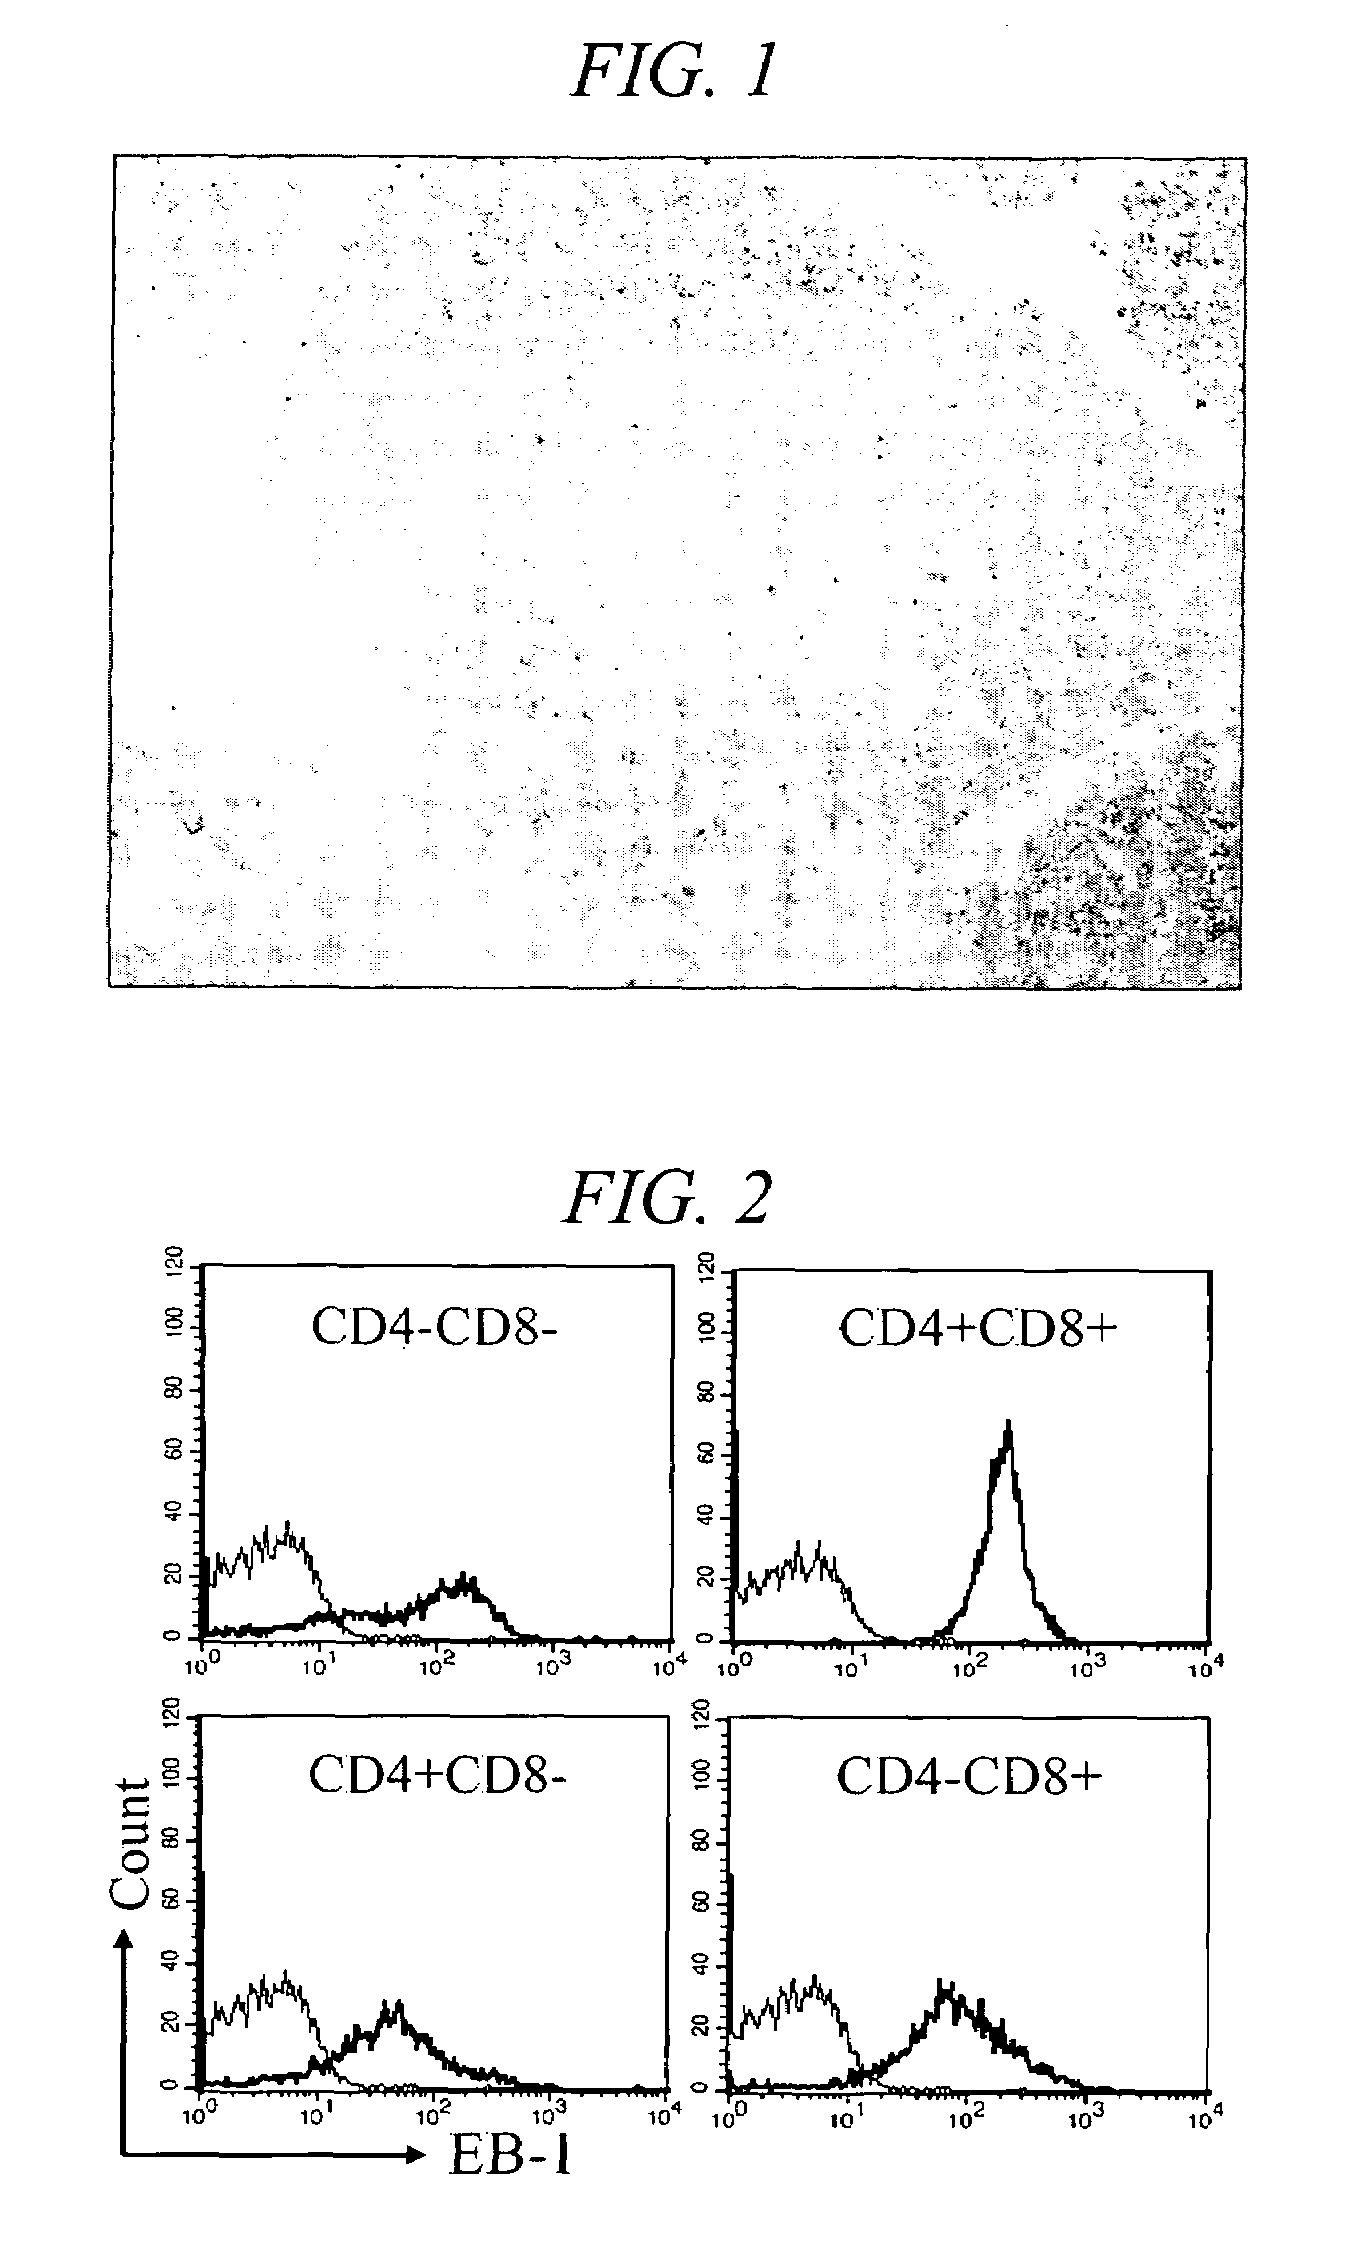 Monoclonal antibody specific for CD43 epitope